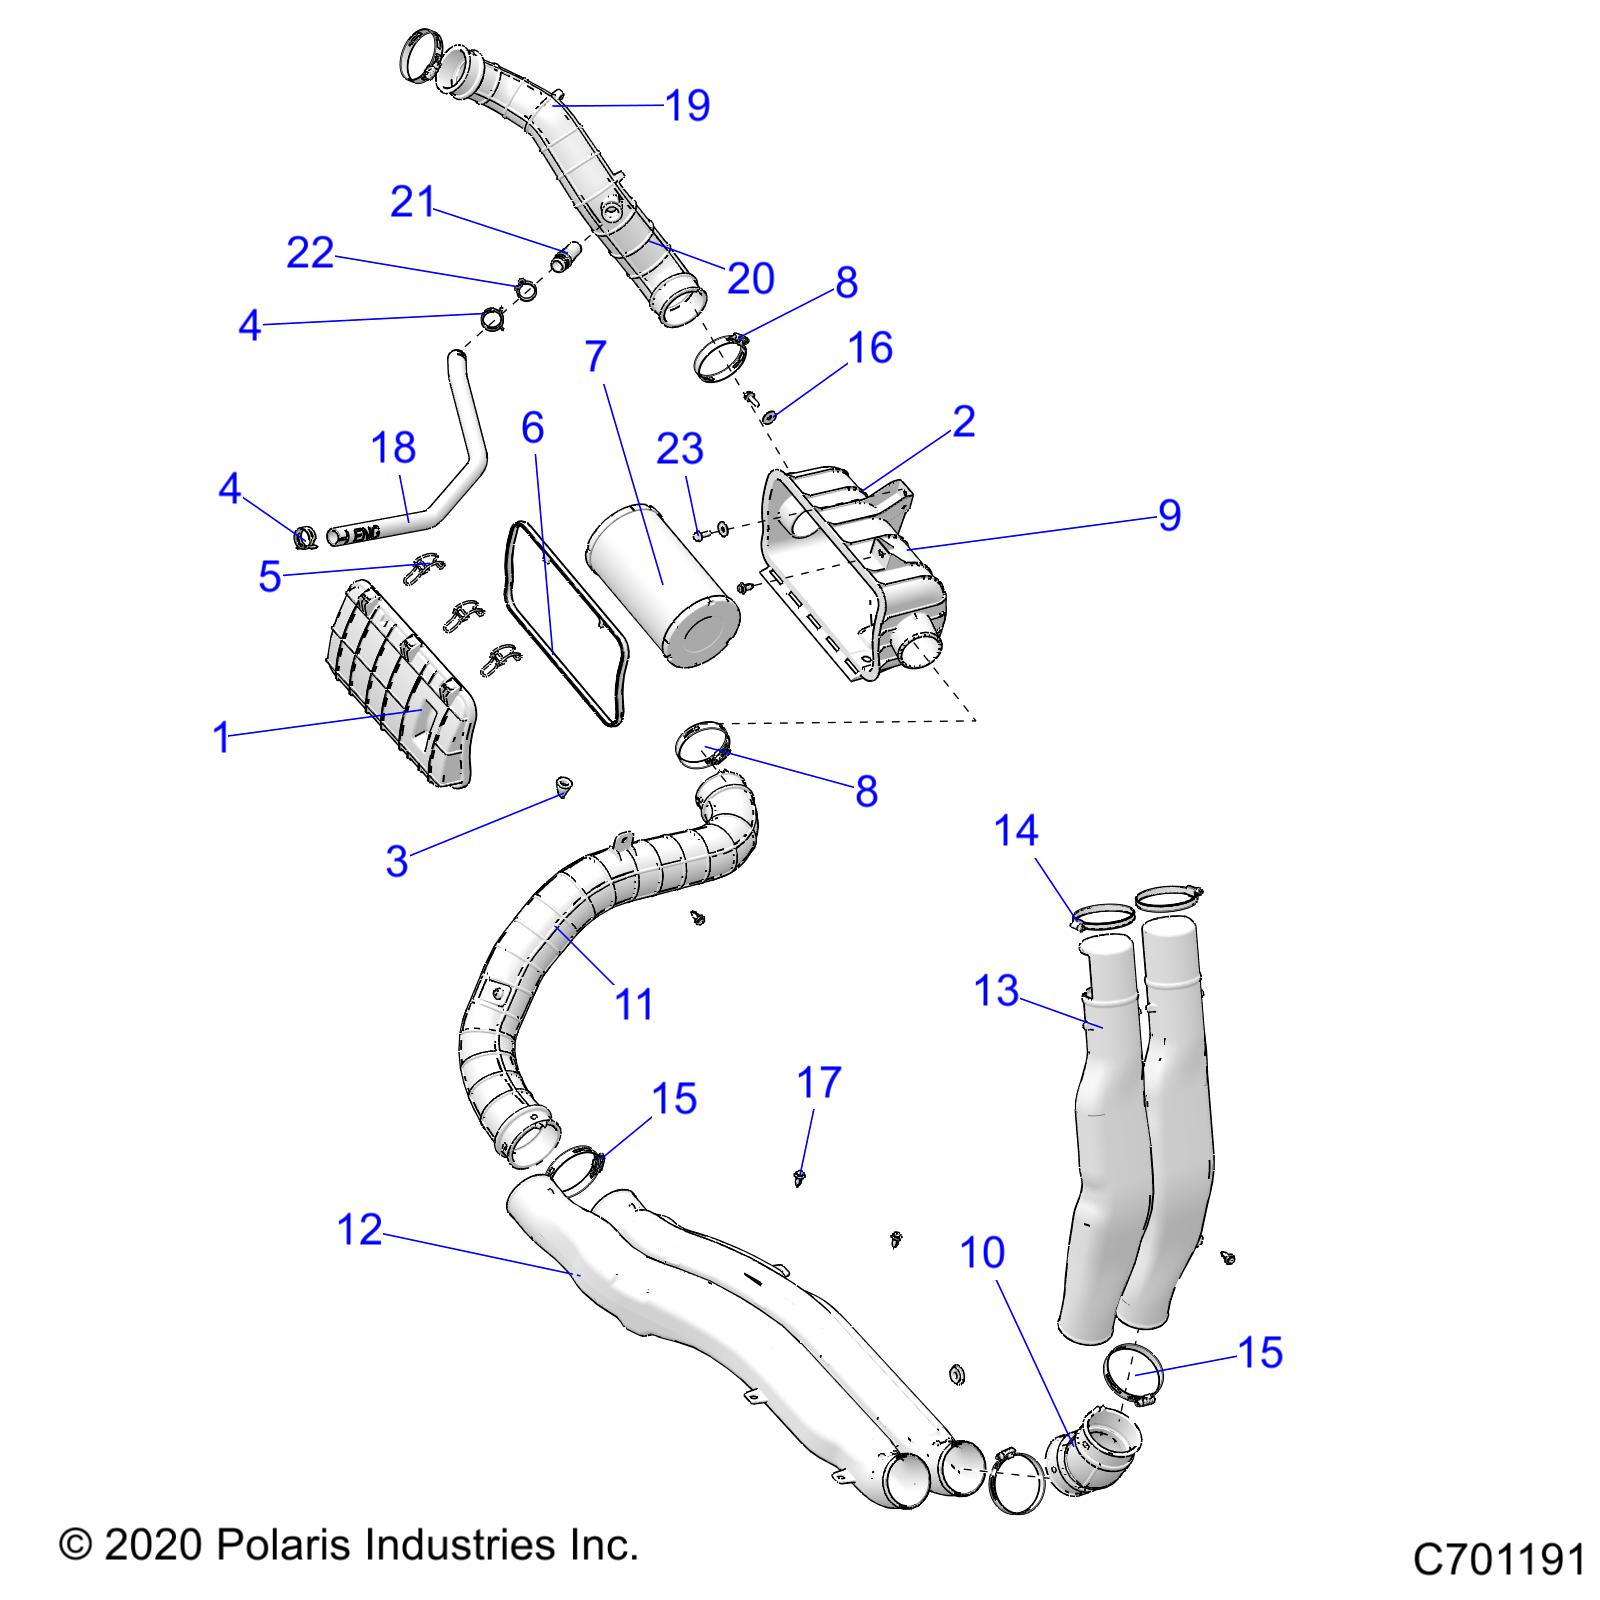 Part Number : 1241155 AIRBOX TO PLENUM ASSEMBLY